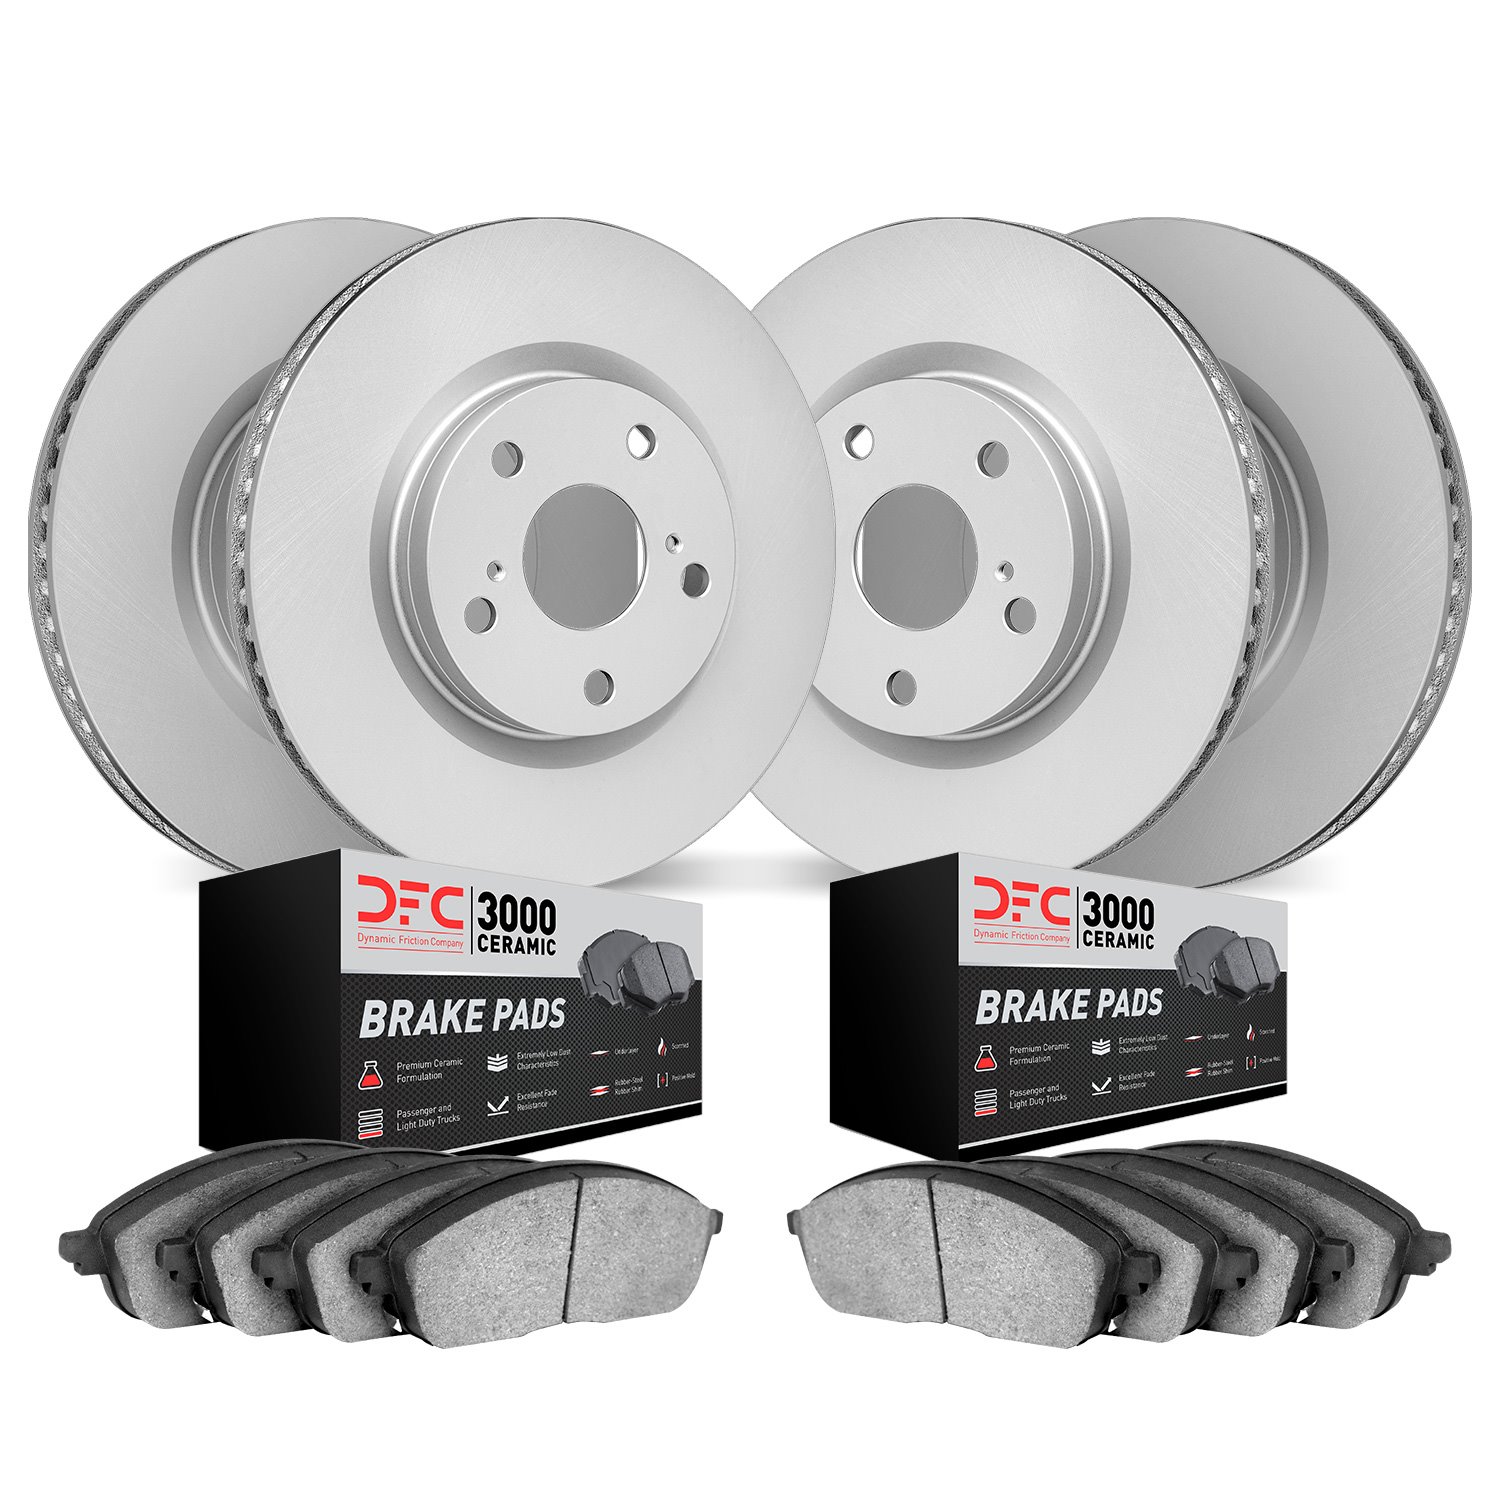 4304-31071 Geospec Brake Rotors with 3000-Series Ceramic Brake Pads Kit, Fits Select BMW, Position: Front and Rear